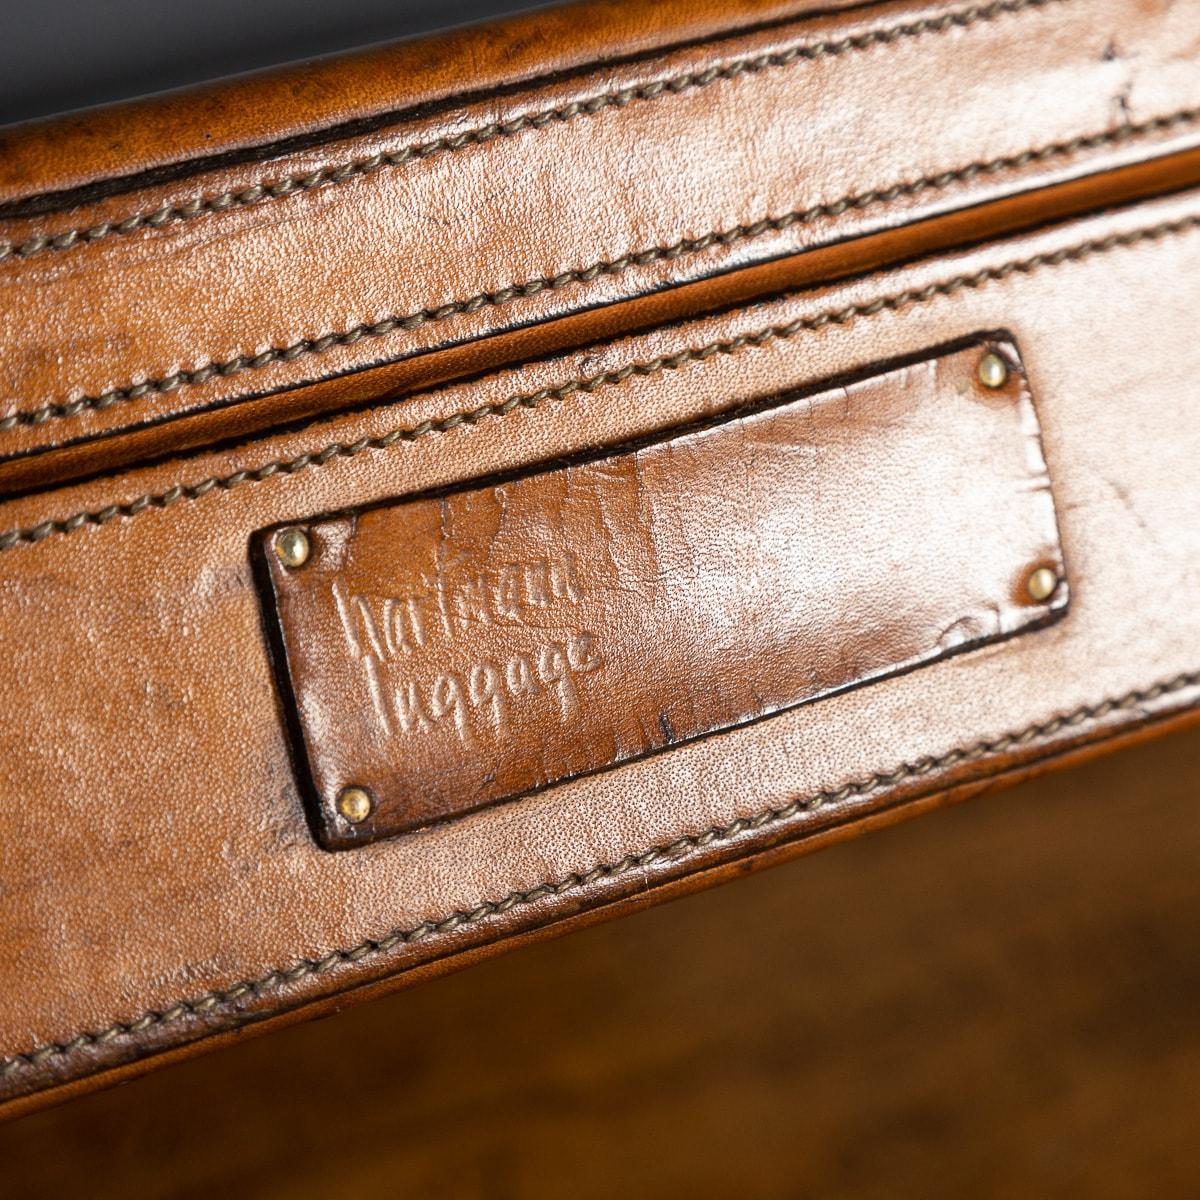 20th Century American Leather Briefcase by Hartmann, circa 1920 For Sale 11